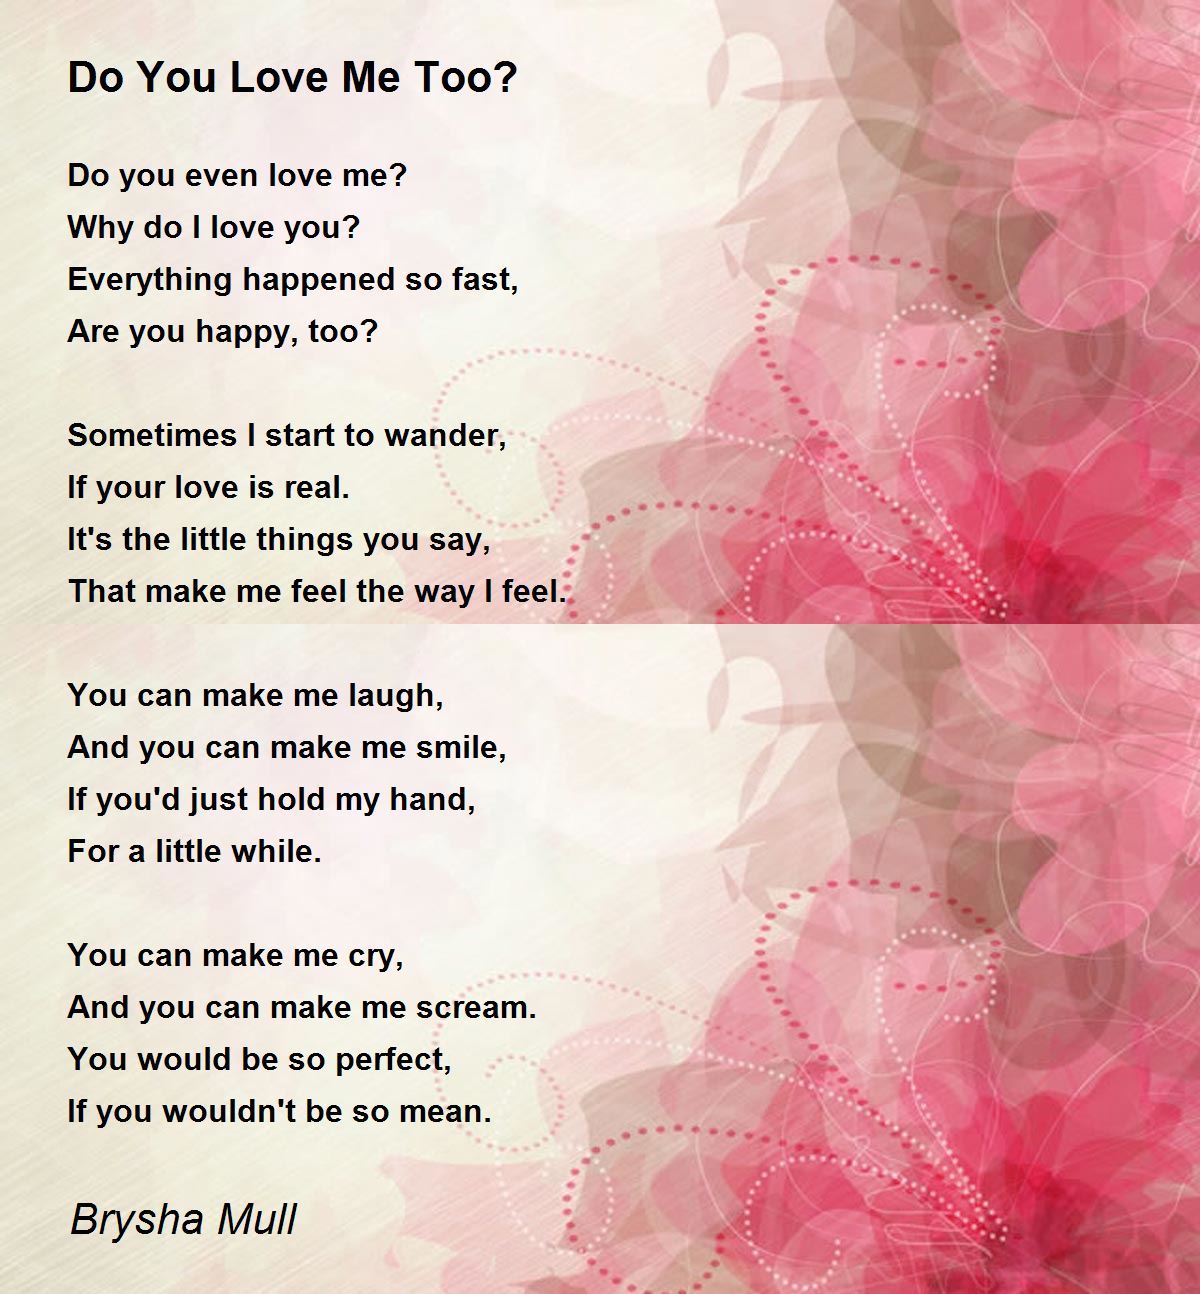 Do You Love Me Too? - Do You Love Me Too? Poem by Brysha Mull